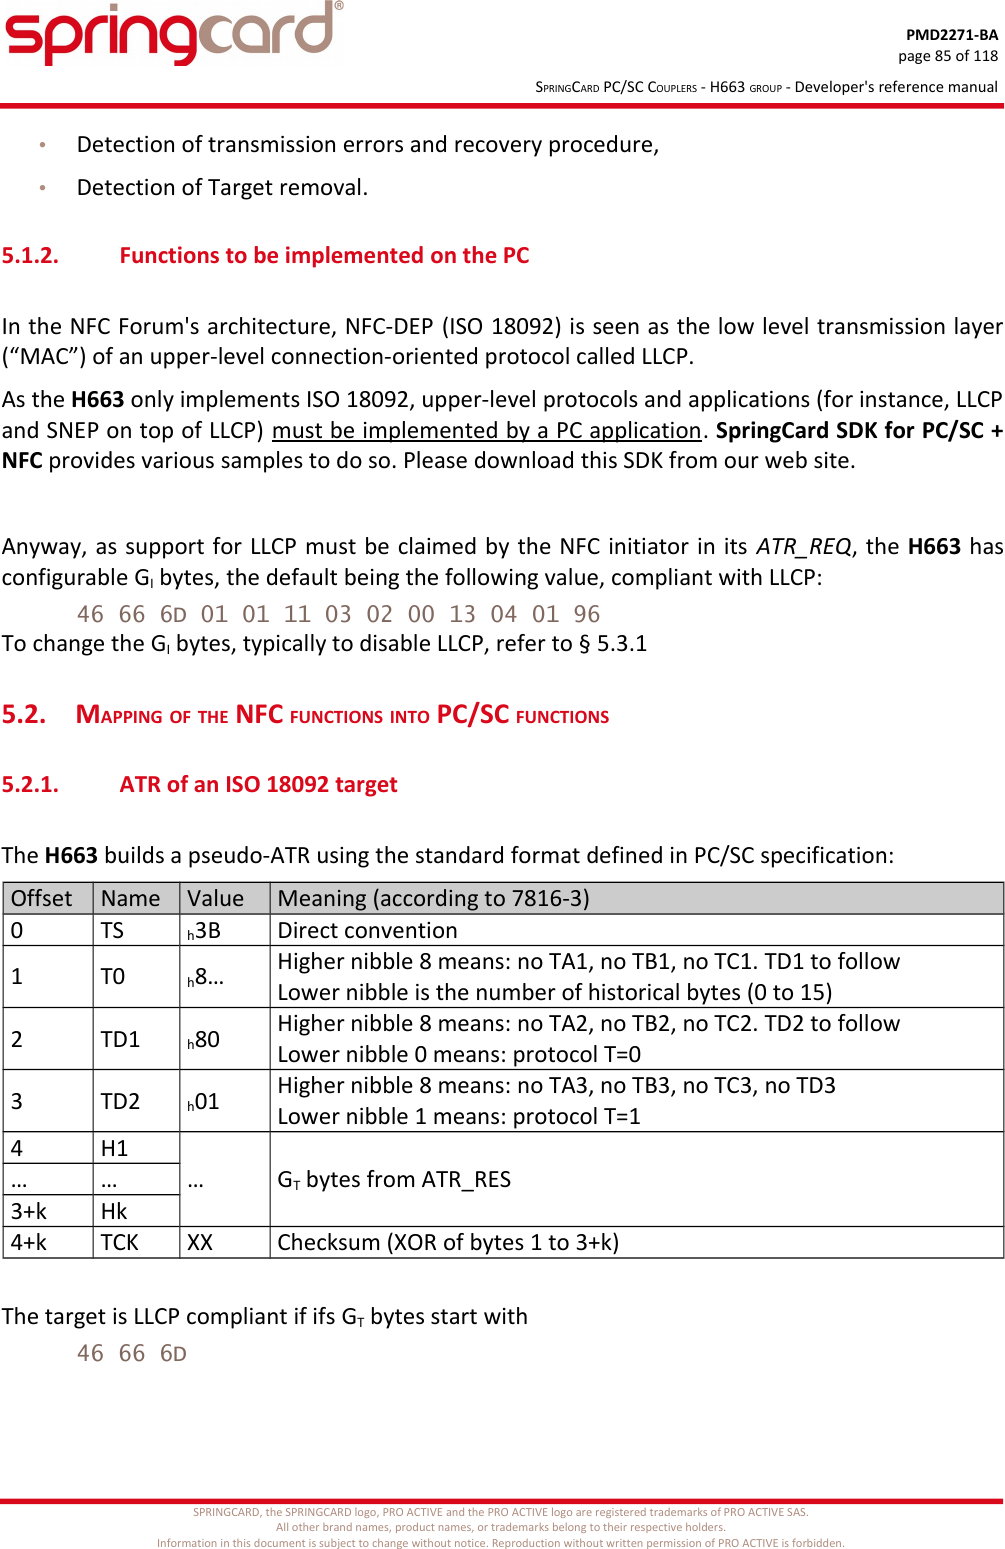 PMD2271-BApage 85 of 118SPRINGCARD PC/SC COUPLERS - H663 GROUP - Developer&apos;s reference manual•Detection of transmission errors and recovery procedure,•Detection of Target removal.5.1.2. Functions to be implemented on the PCIn the NFC Forum&apos;s architecture, NFC-DEP (ISO 18092) is seen as the low level transmission layer(“MAC”) of an upper-level connection-oriented protocol called LLCP.As the H663 only implements ISO 18092, upper-level protocols and applications (for instance, LLCPand SNEP on top of LLCP) must be implemented by a PC application. SpringCard SDK for PC/SC +NFC provides various samples to do so. Please download this SDK from our web site.Anyway, as support for LLCP must be claimed by the NFC initiator in its ATR_REQ, the H663 hasconfigurable GI bytes, the default being the following value, compliant with LLCP:46 66 6D 01 01 11 03 02 00 13 04 01 96To change the GI bytes, typically to disable LLCP, refer to § 5.3.15.2. MAPPING OF THE NFC FUNCTIONS INTO PC/SC FUNCTIONS5.2.1. ATR of an ISO 18092 targetThe H663 builds a pseudo-ATR using the standard format defined in PC/SC specification:Offset Name Value Meaning (according to 7816-3)0 TS h3B Direct convention1 T0 h8… Higher nibble 8 means: no TA1, no TB1, no TC1. TD1 to followLower nibble is the number of historical bytes (0 to 15)2 TD1 h80 Higher nibble 8 means: no TA2, no TB2, no TC2. TD2 to followLower nibble 0 means: protocol T=03 TD2 h01 Higher nibble 8 means: no TA3, no TB3, no TC3, no TD3Lower nibble 1 means: protocol T=14 H1… GT bytes from ATR_RES… …3+k Hk4+k TCK XX Checksum (XOR of bytes 1 to 3+k)The target is LLCP compliant if ifs GT bytes start with46 66 6DSPRINGCARD, the SPRINGCARD logo, PRO ACTIVE and the PRO ACTIVE logo are registered trademarks of PRO ACTIVE SAS.All other brand names, product names, or trademarks belong to their respective holders.Information in this document is subject to change without notice. Reproduction without written permission of PRO ACTIVE is forbidden.